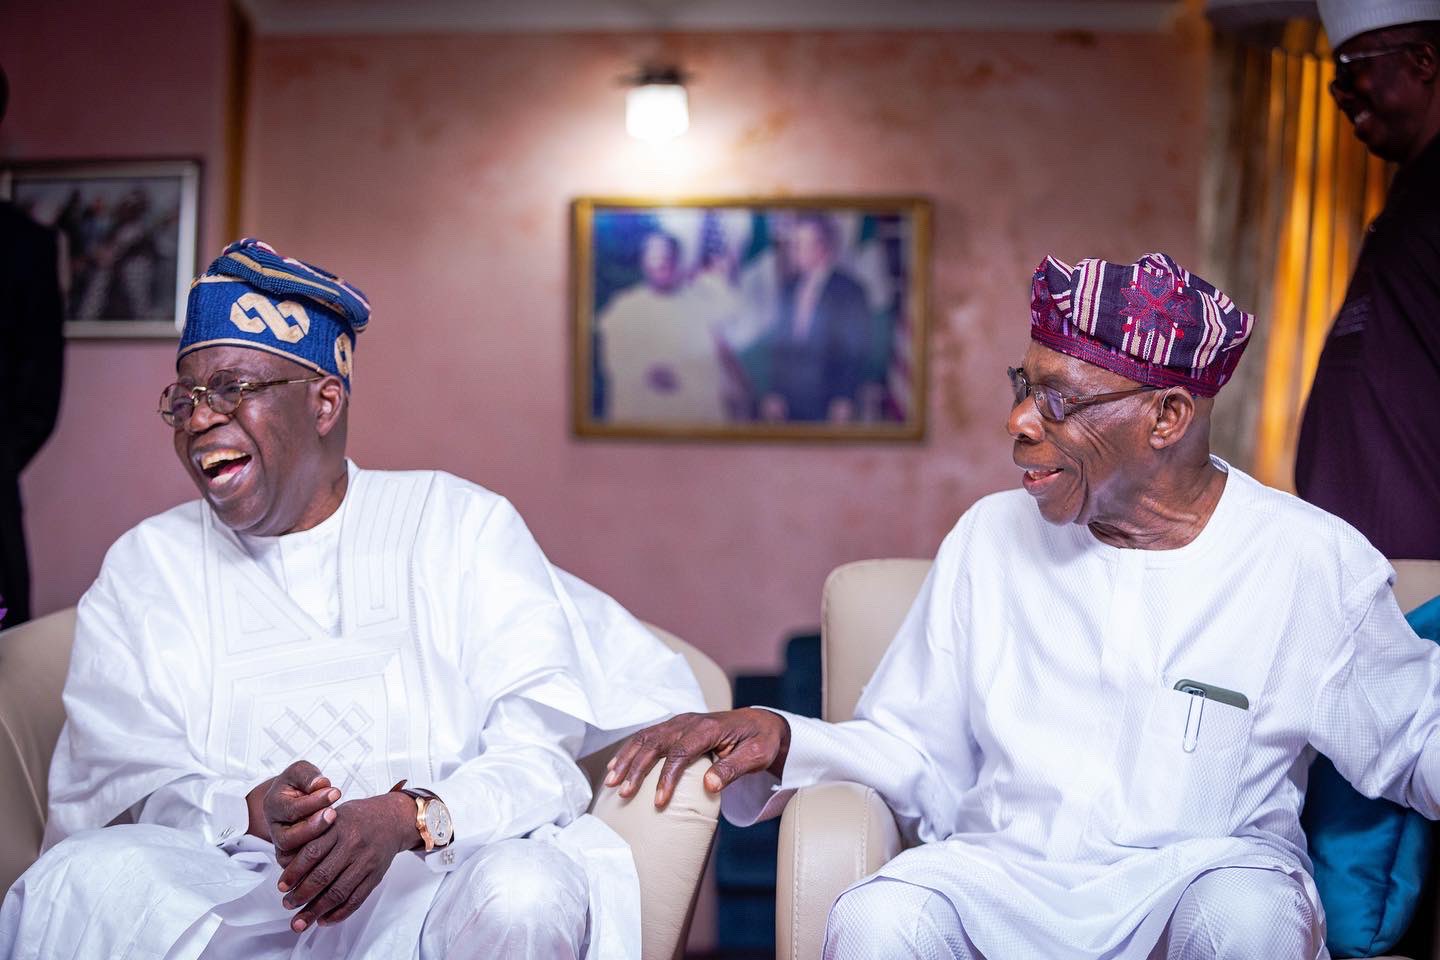 2023: Obasanjo reveals jokes he shared with Tinubu during his visit